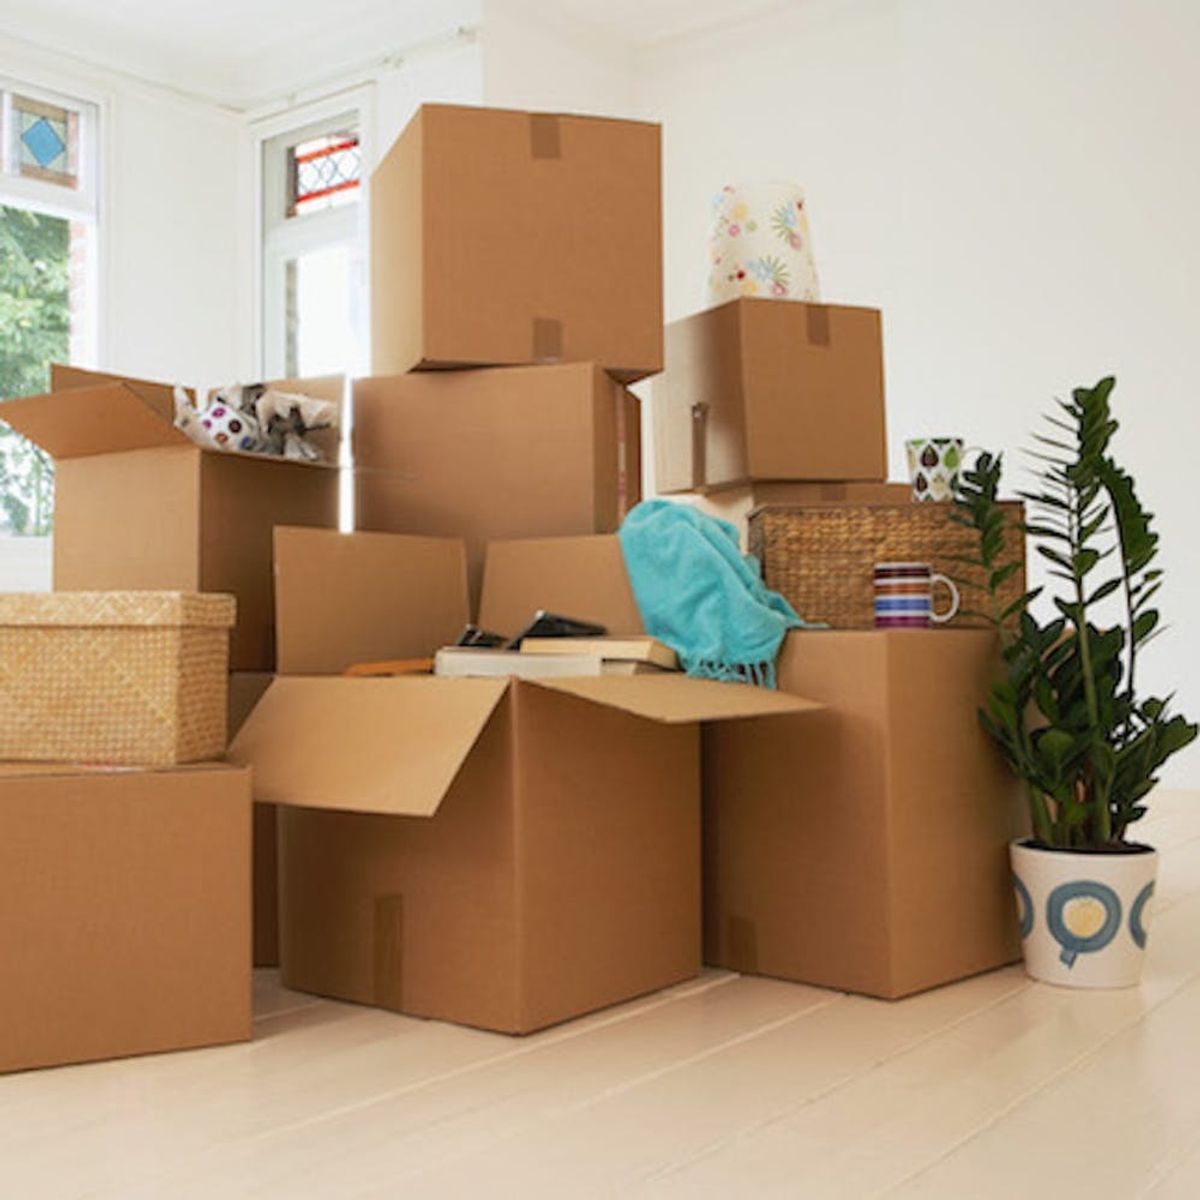 6 Easy (and Totally Doable) Tips to Simplify Your Move